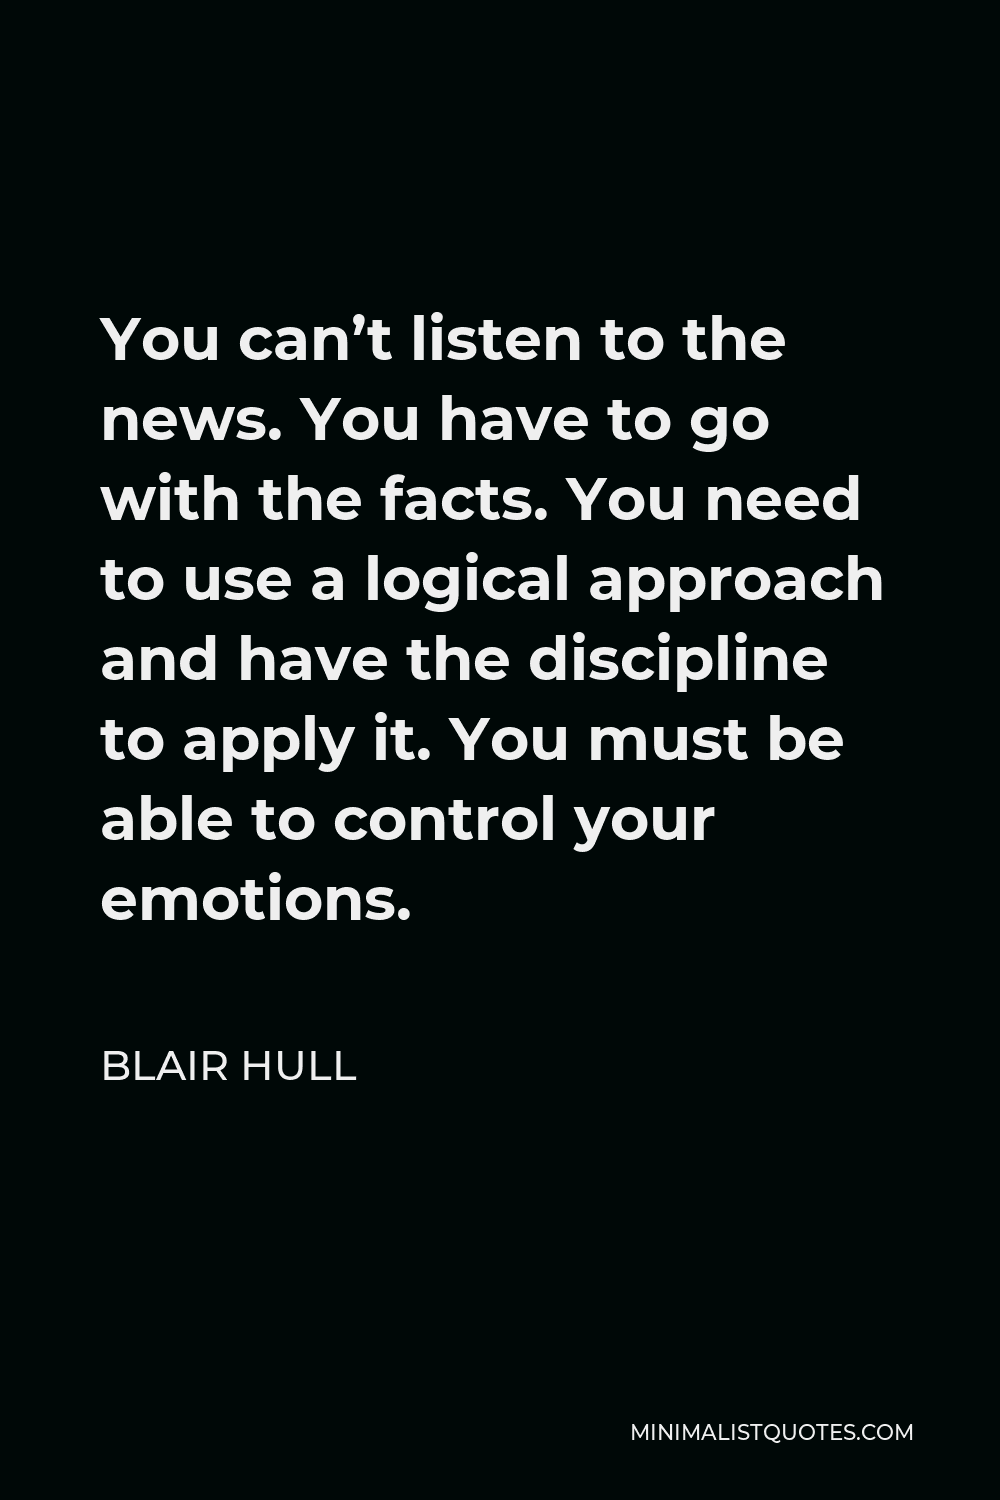 Blair Hull Quote - You can’t listen to the news. You have to go with the facts. You need to use a logical approach and have the discipline to apply it. You must be able to control your emotions.